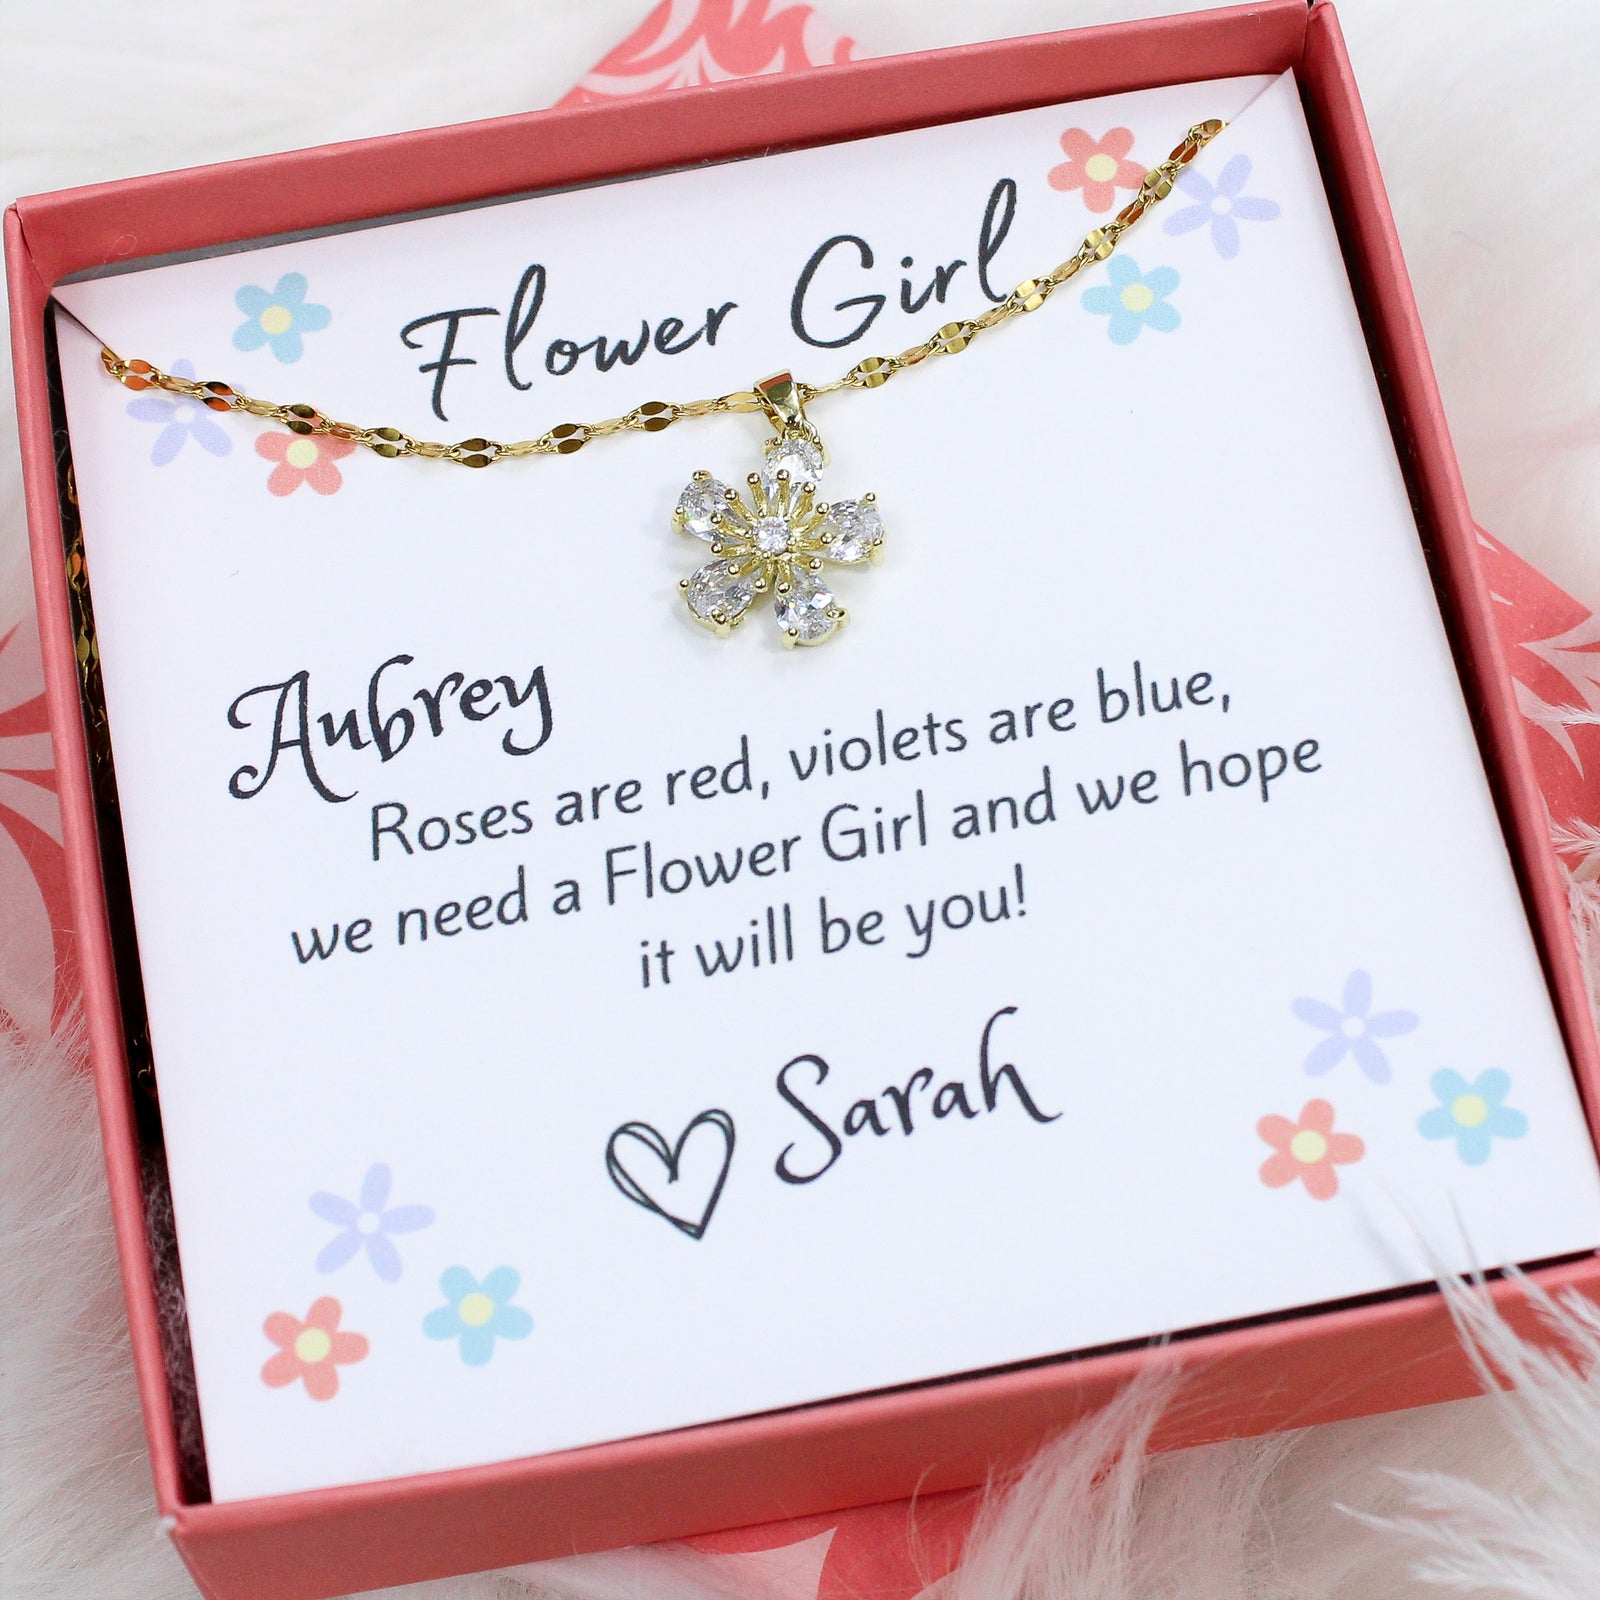 TINGN Bridesmaid Gifts Flower Girl Gifts for Wedding Day